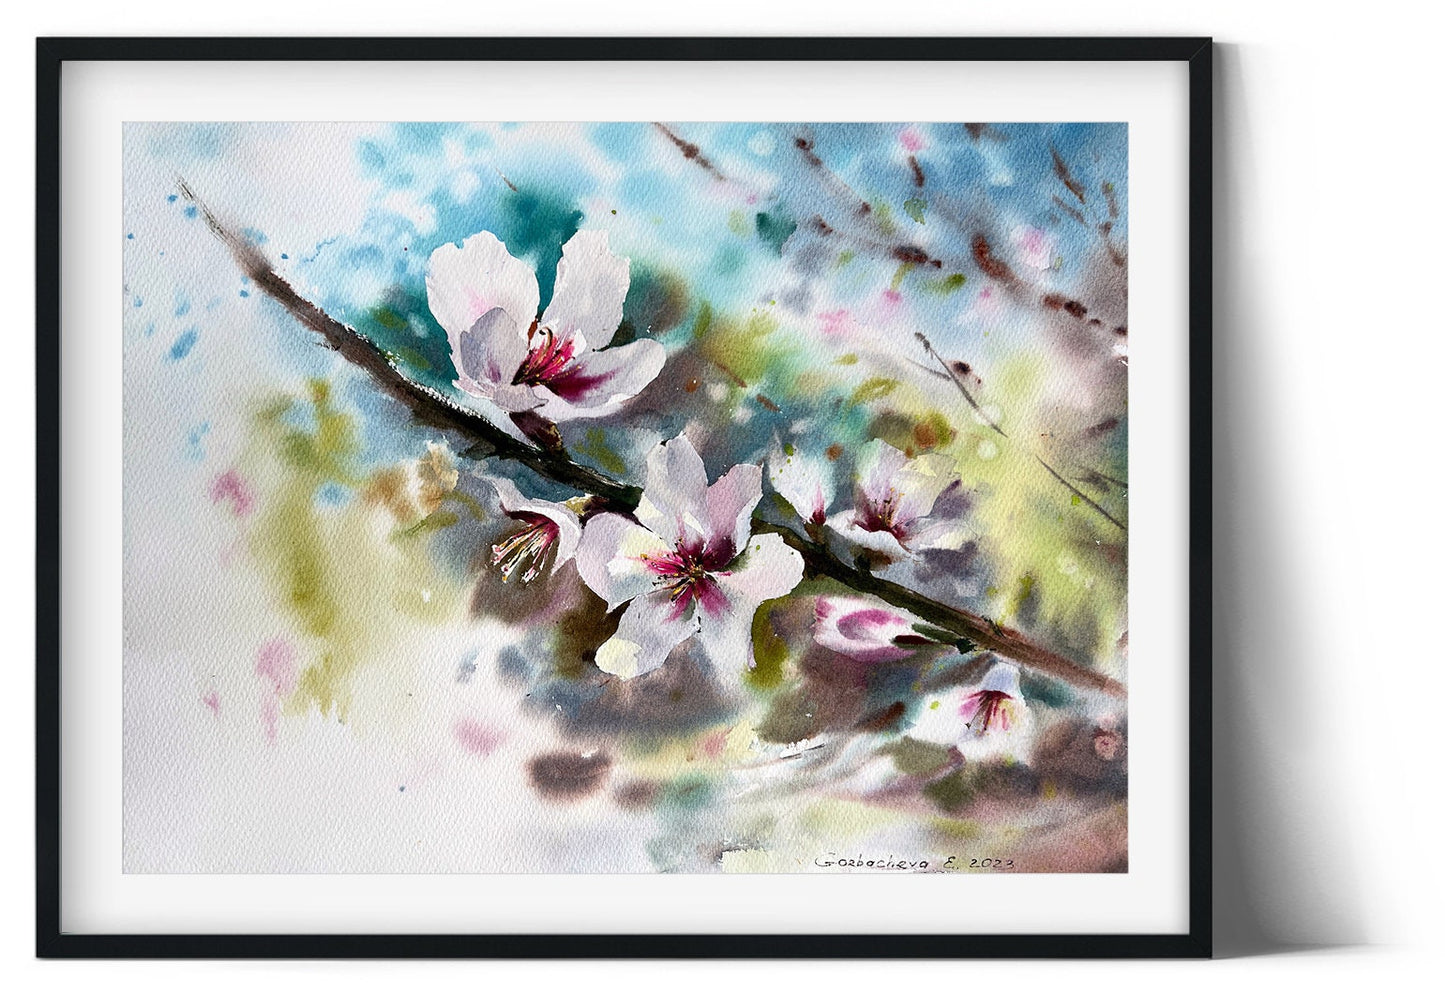 Blooming Flower Painting, Original Watercolor Artwork, Almond Tree, Botanical Wall Decor, Flora Art, Gift for Mom